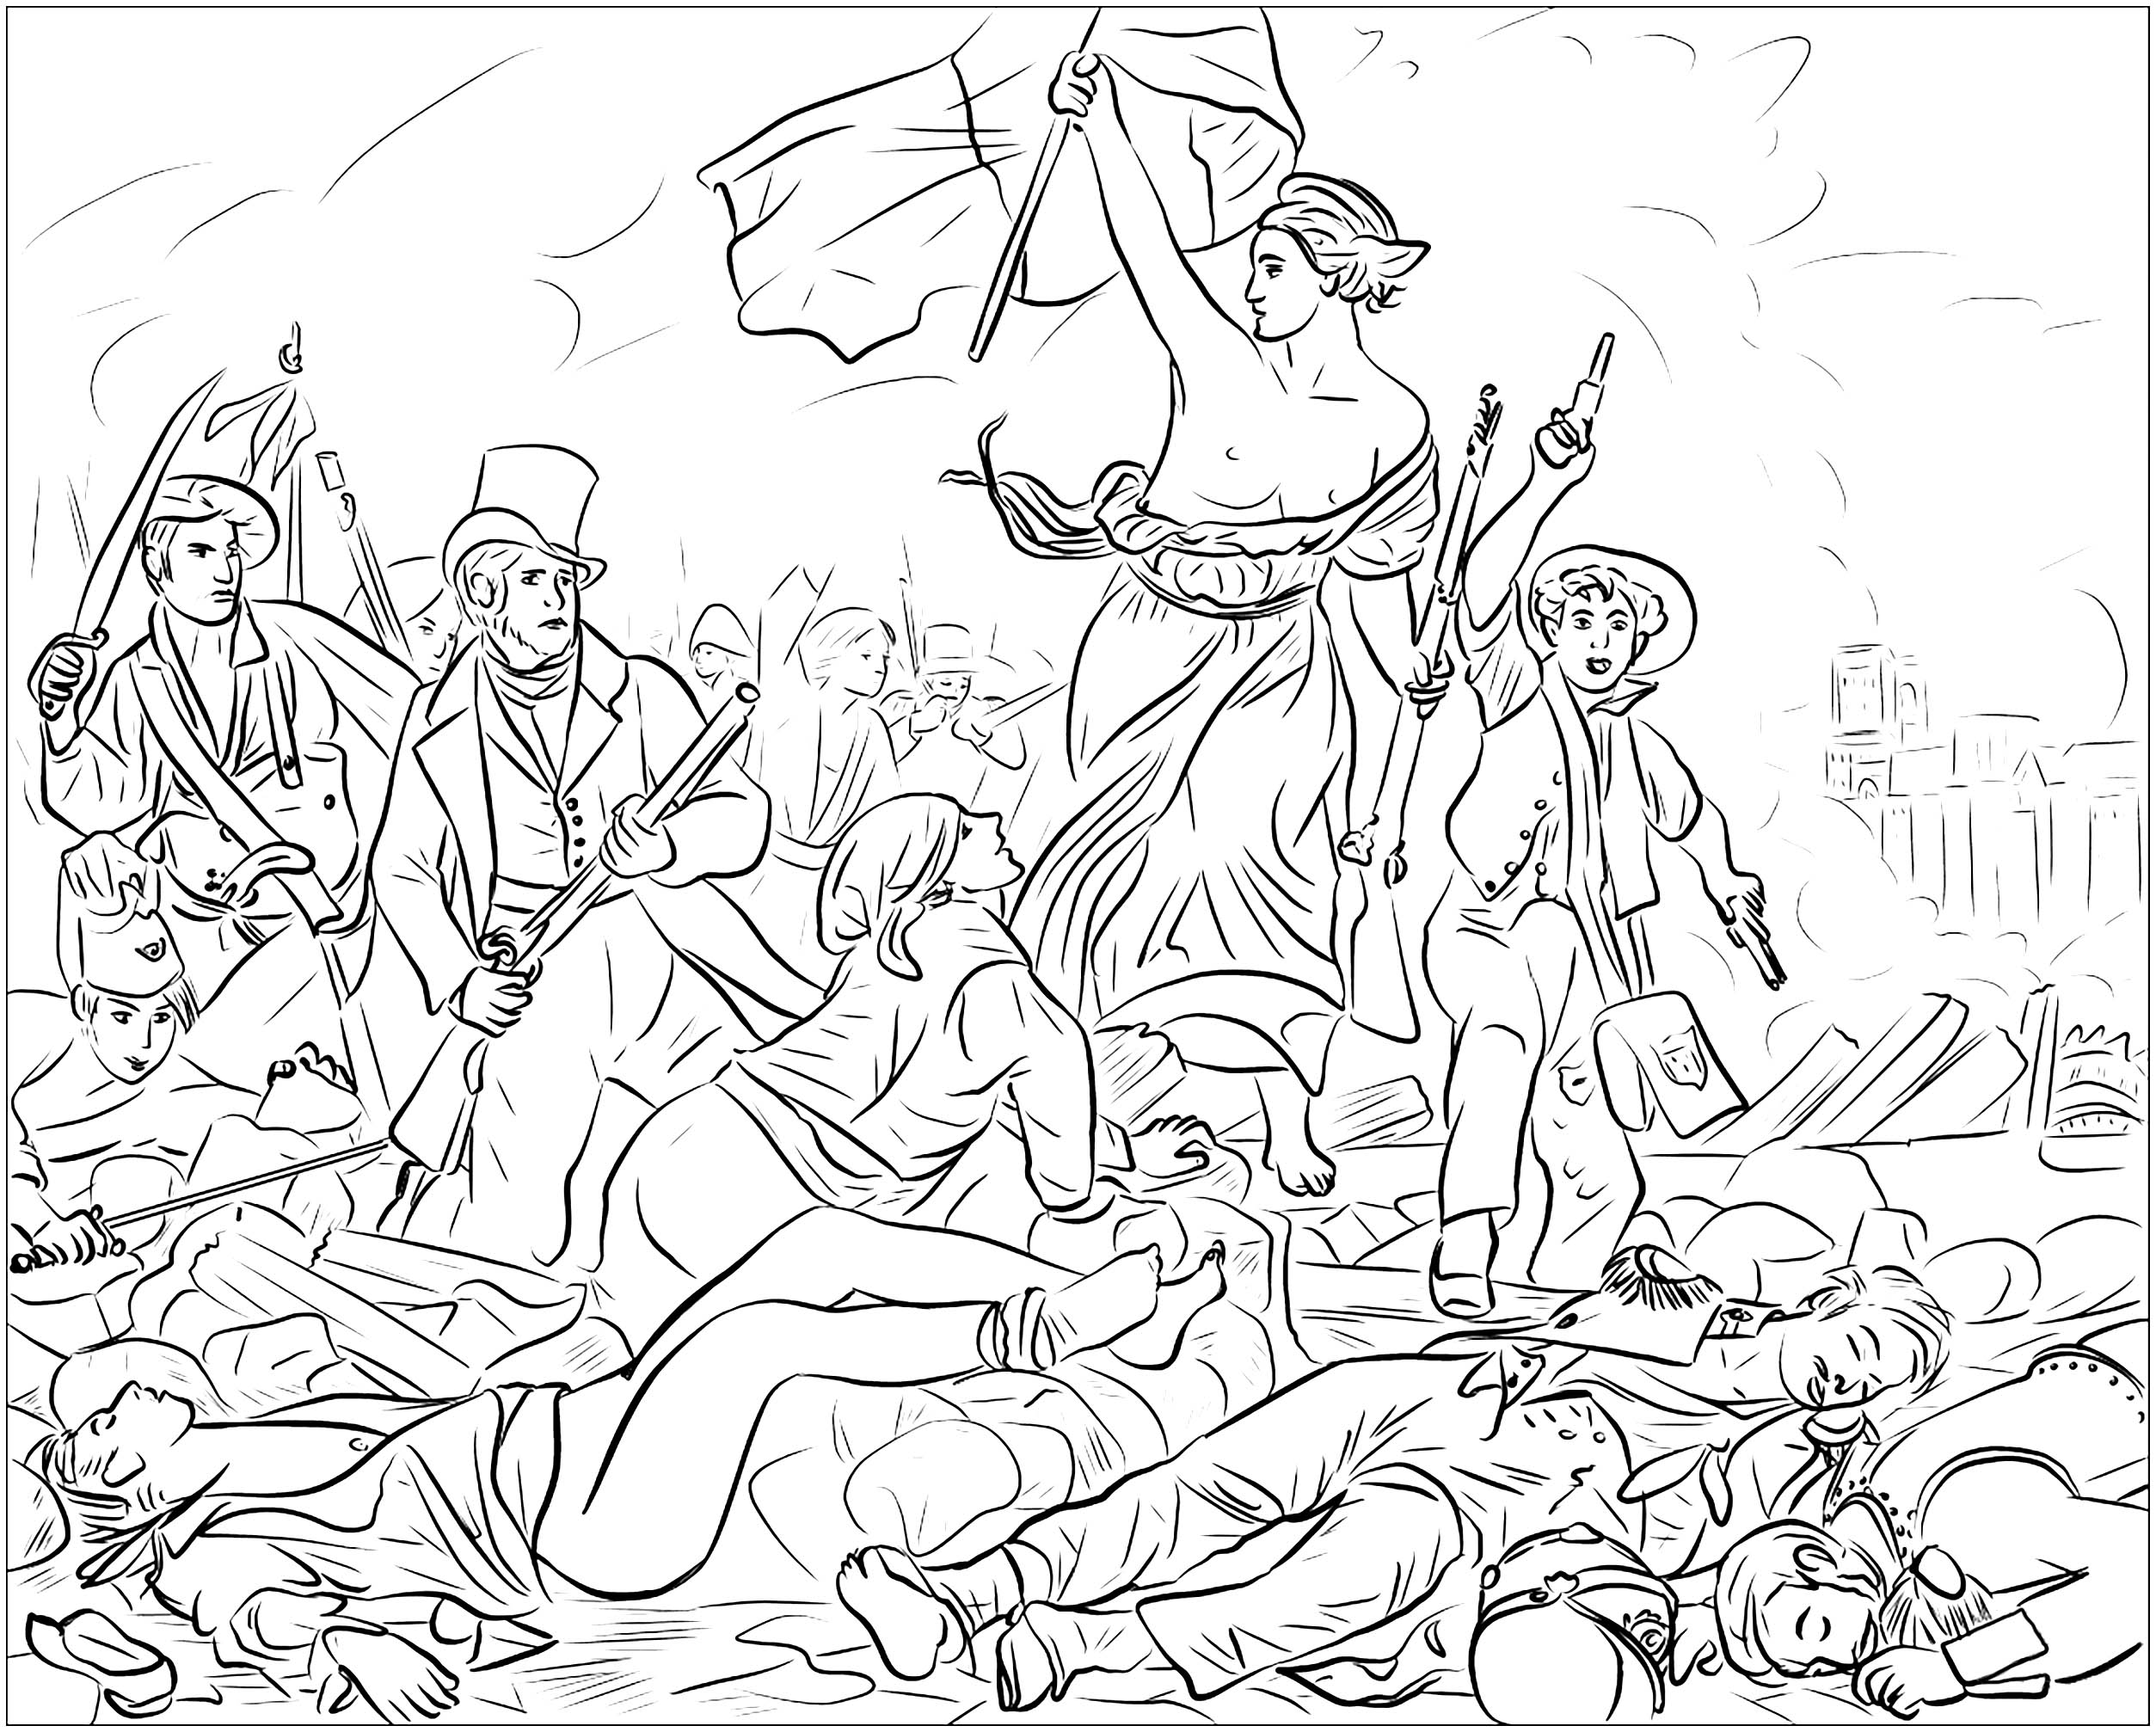 Coloring page created from the famous painting commemorating the July Revolution of 1830 in France, by Eugène Delacroix : Liberty Leading the People, Source : supercoloring   Artist : Nata Silina